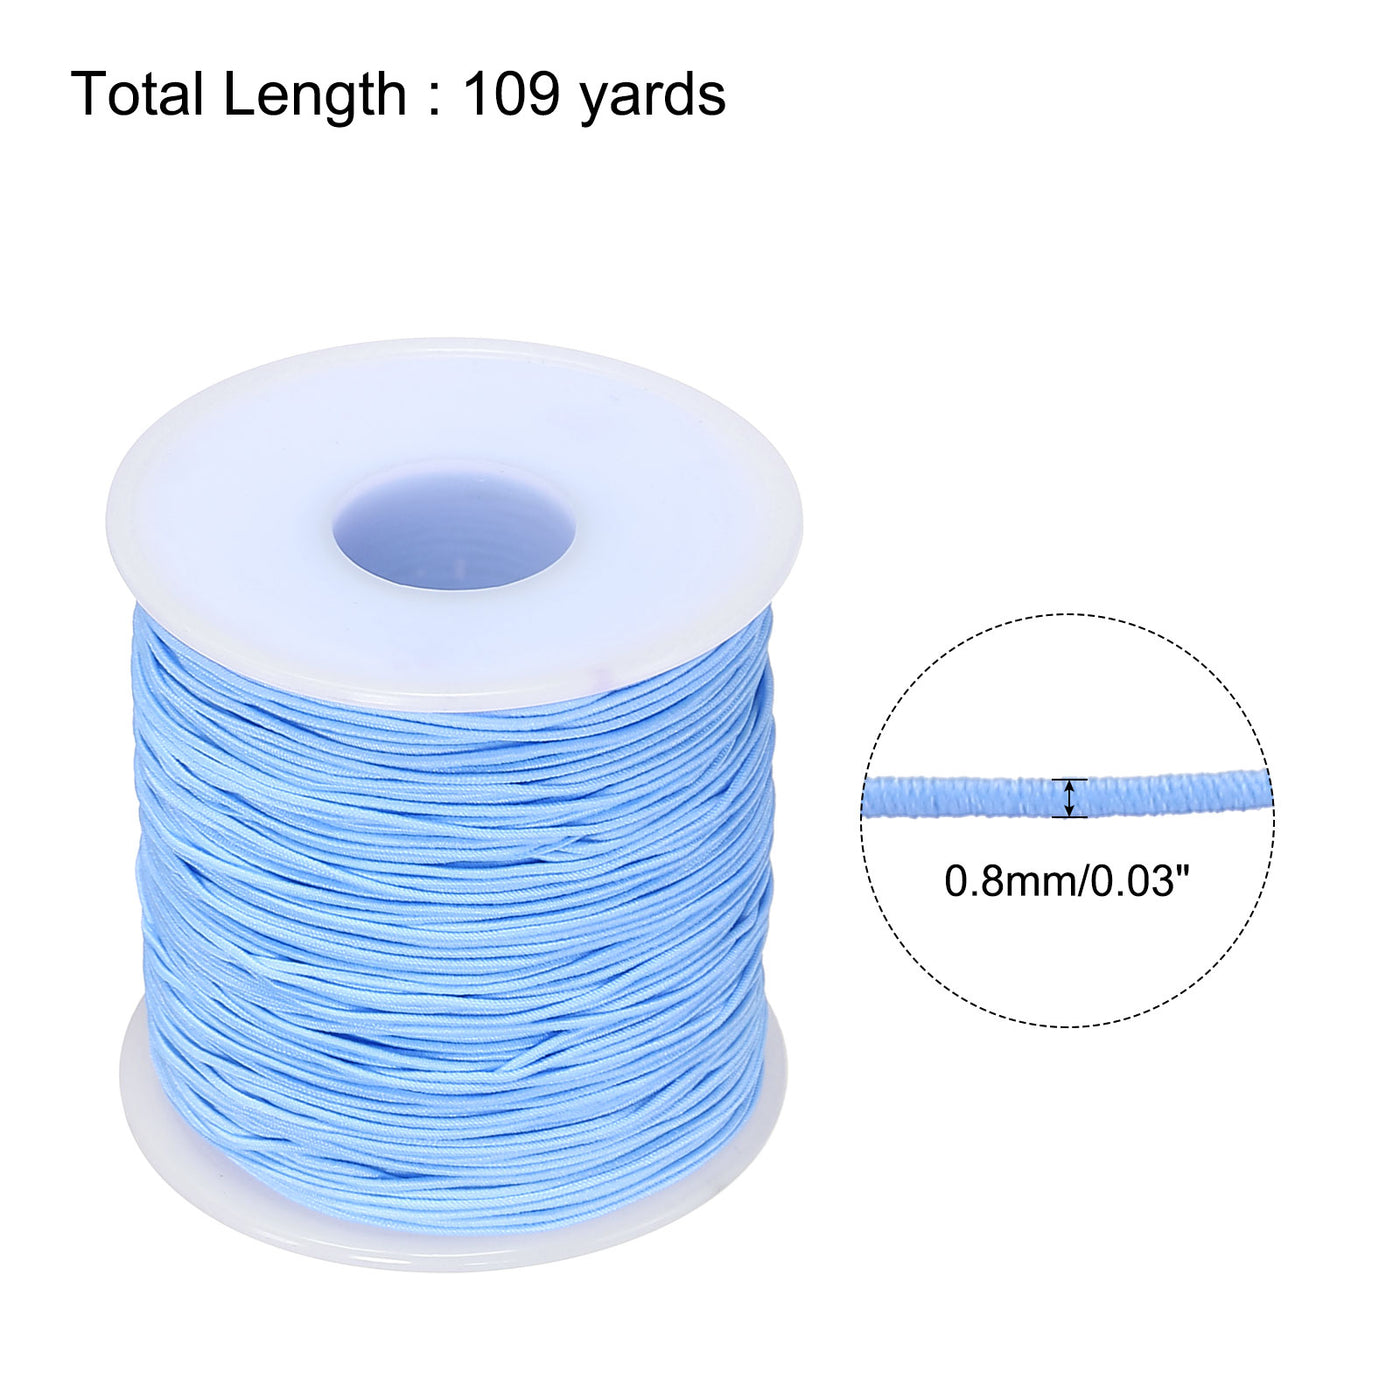 Harfington Elastic Cord Stretchy String 0.8mm 109 Yards Light Blue for Crafts, Jewelry Making, Bracelets, Necklaces, Beading